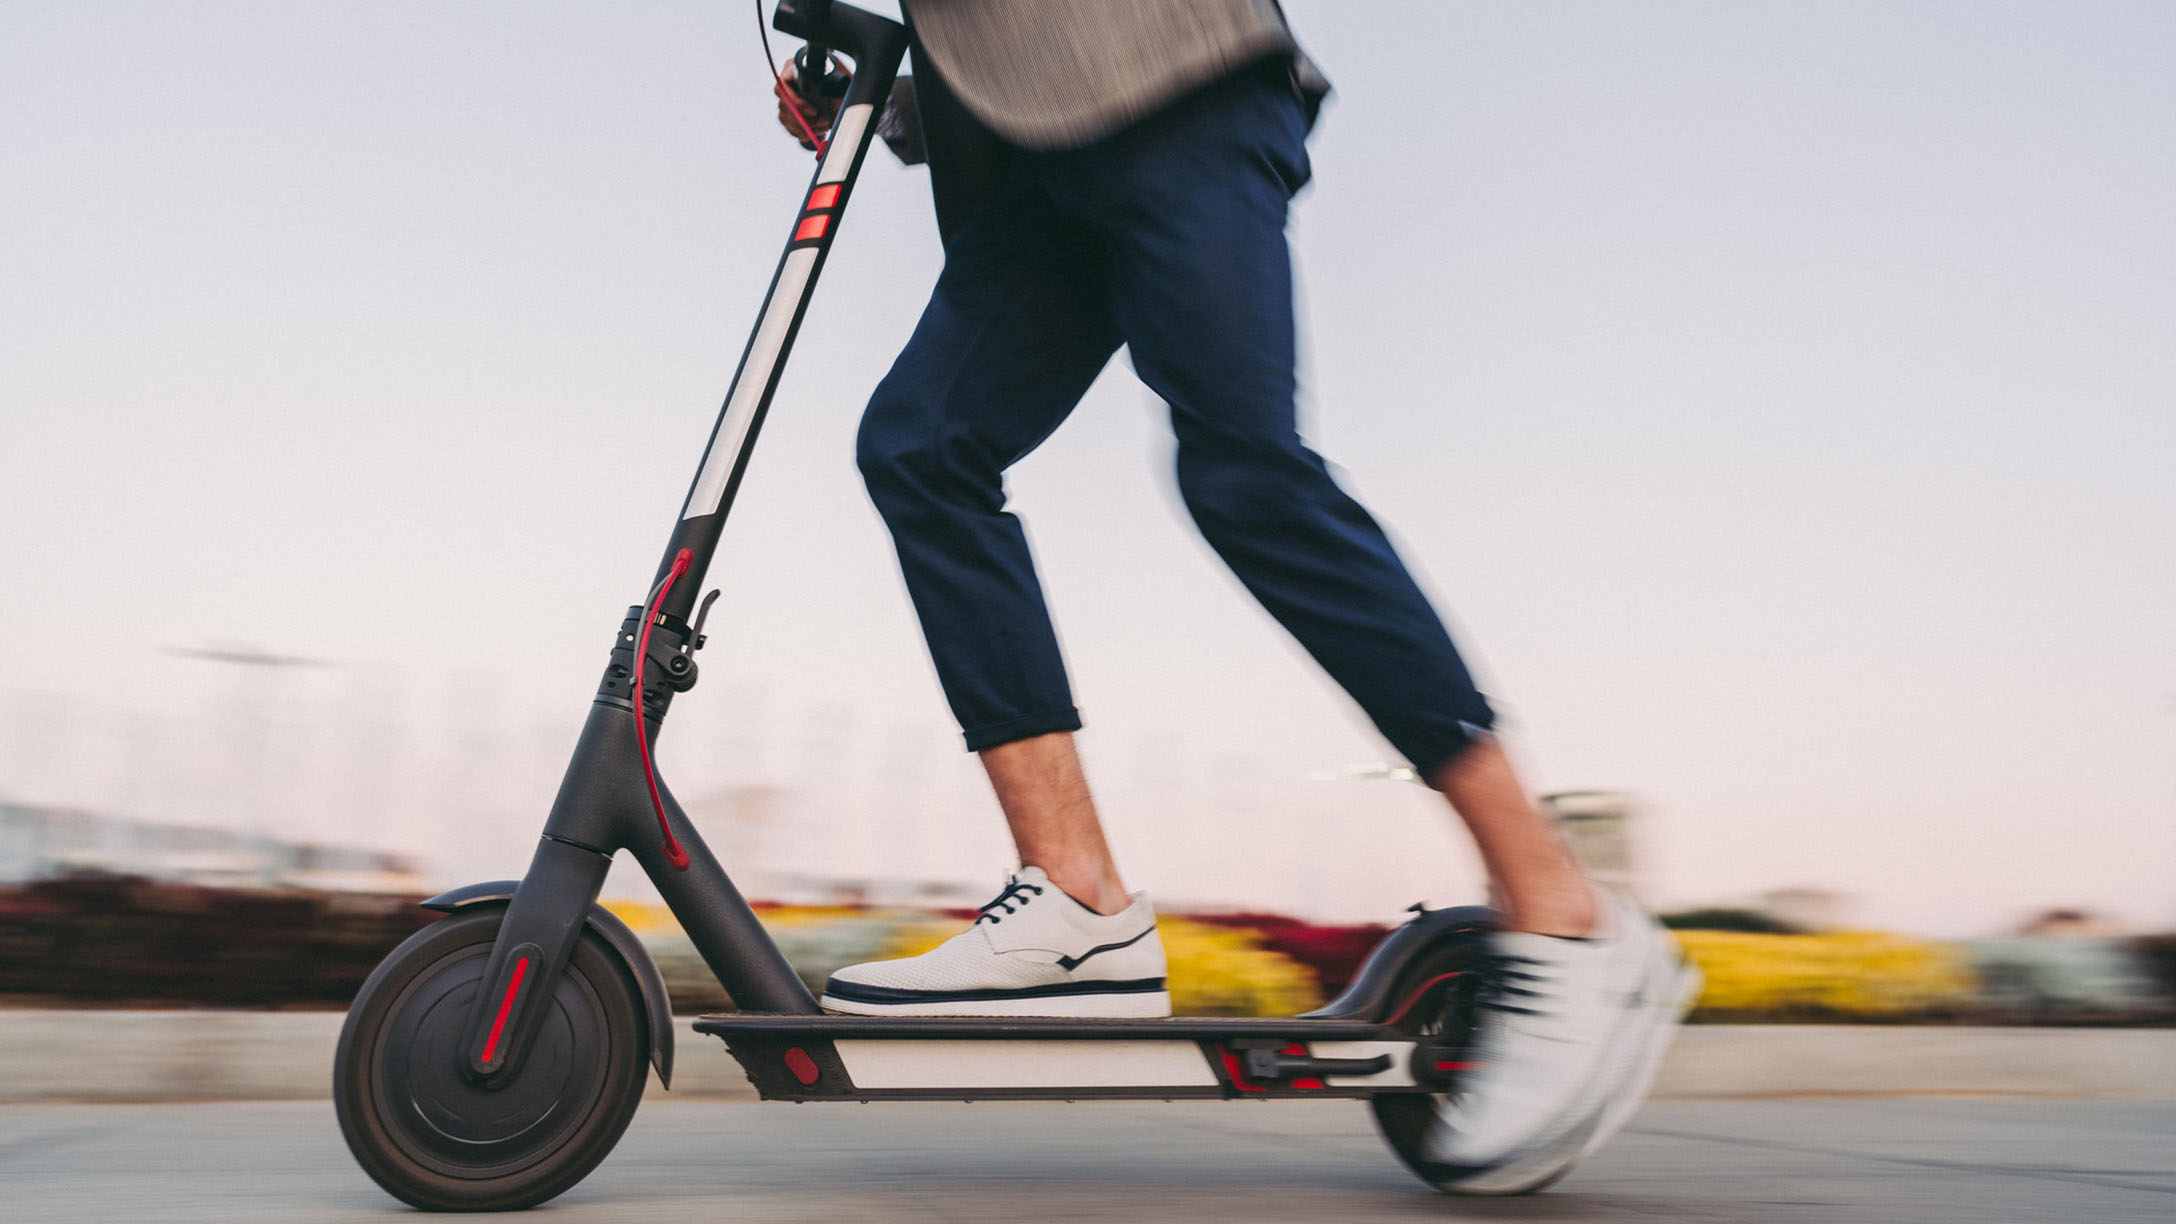 Person on a scooter representing micromobility.